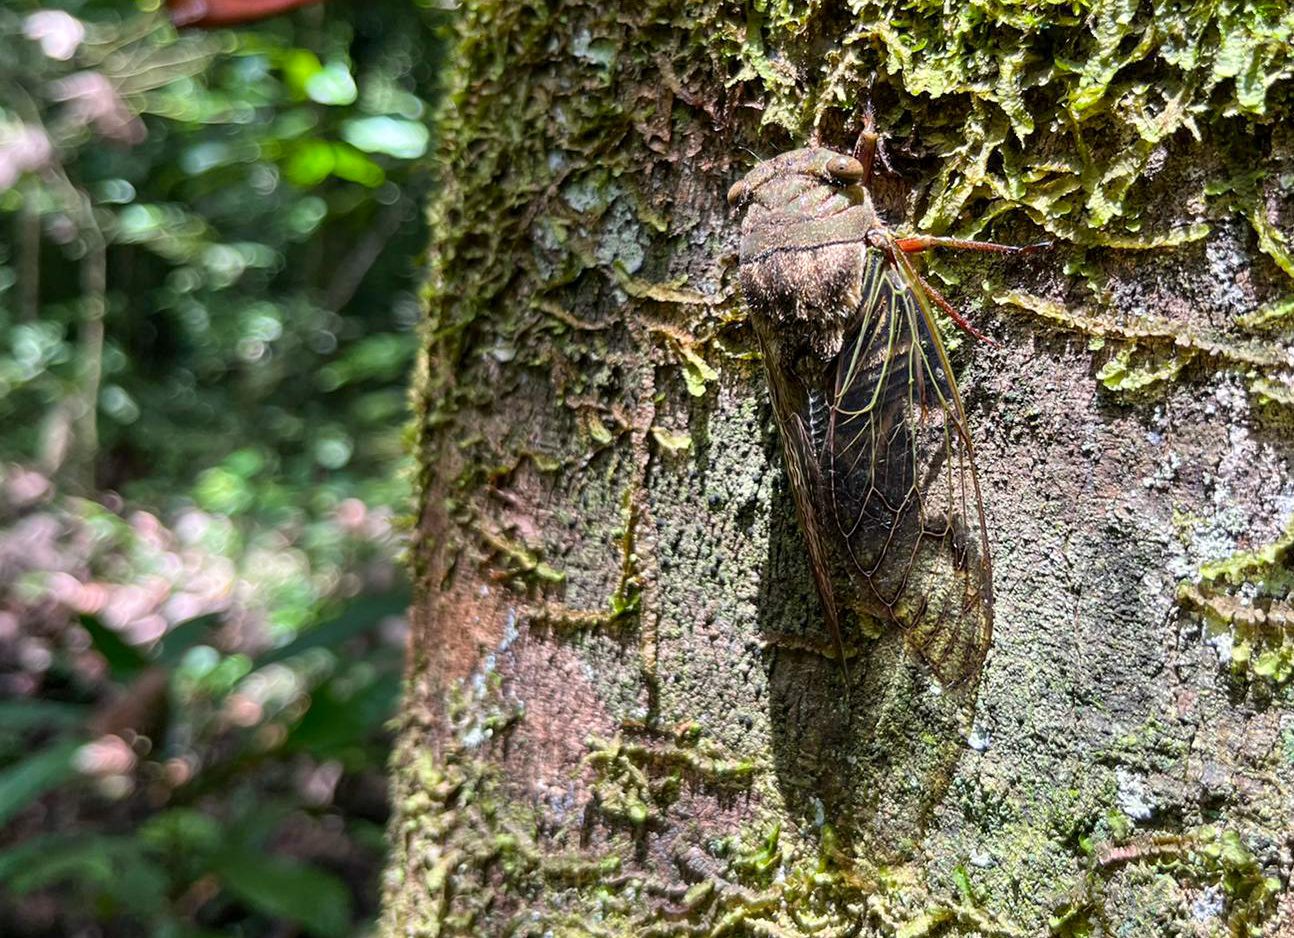 Barro Colorado Island teems with tropical creatures, big and small.